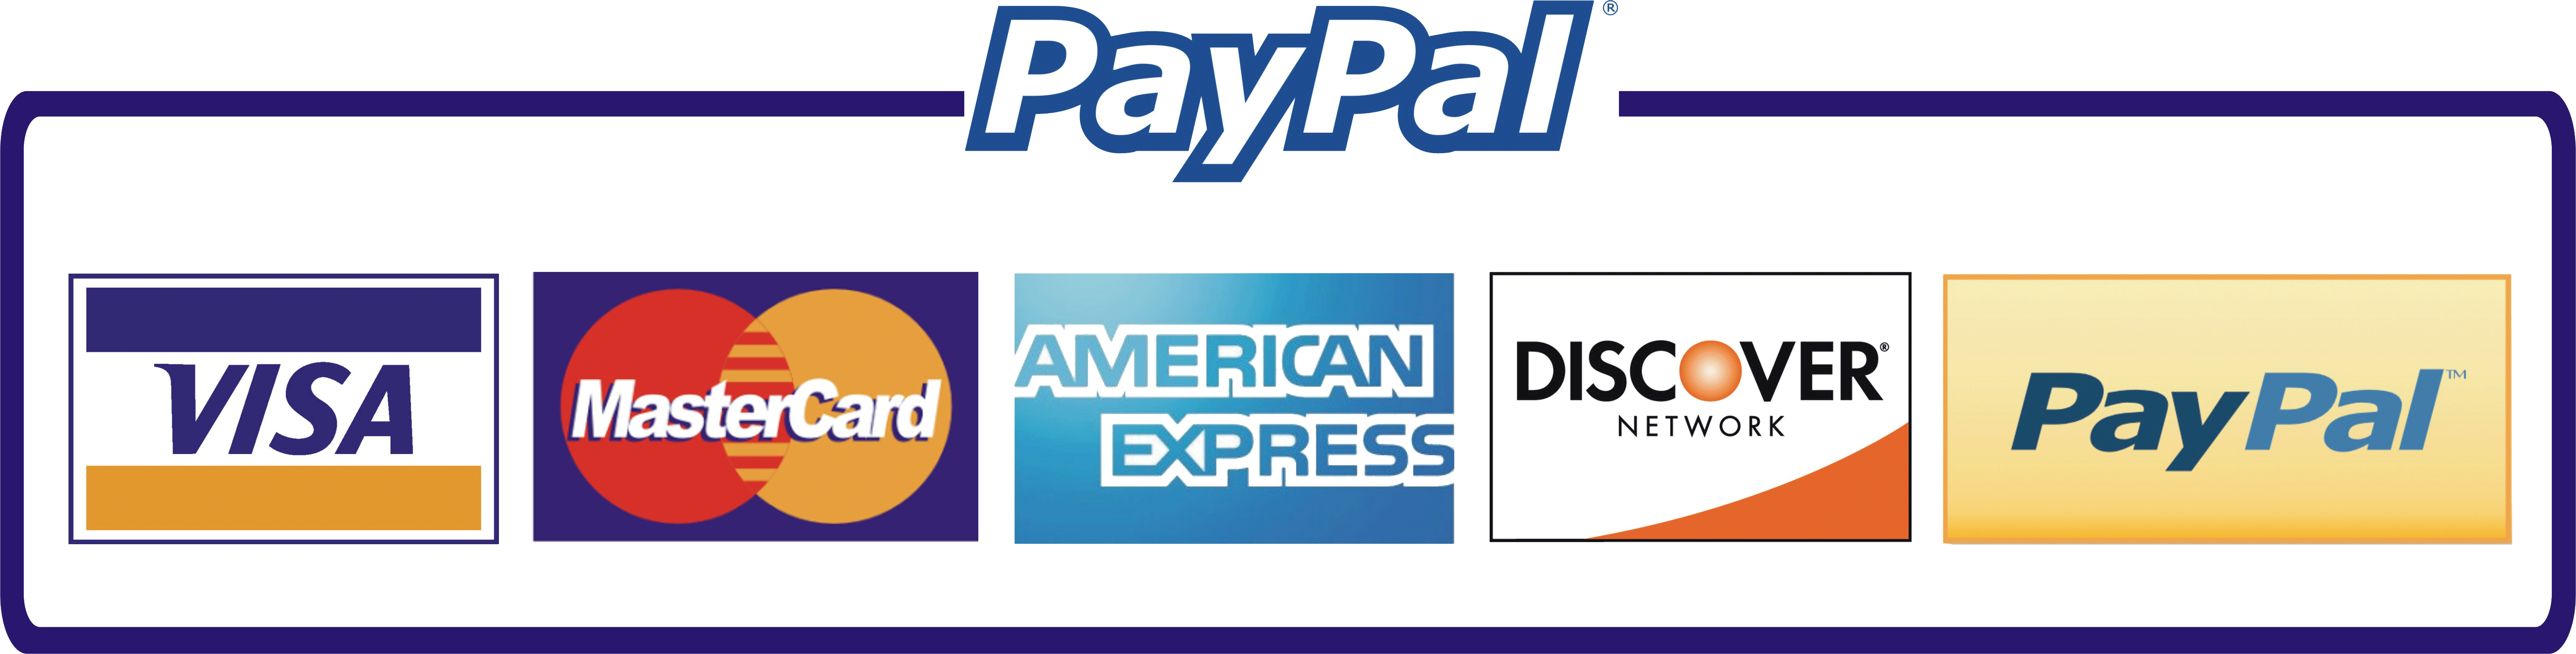 paypal logo with cards